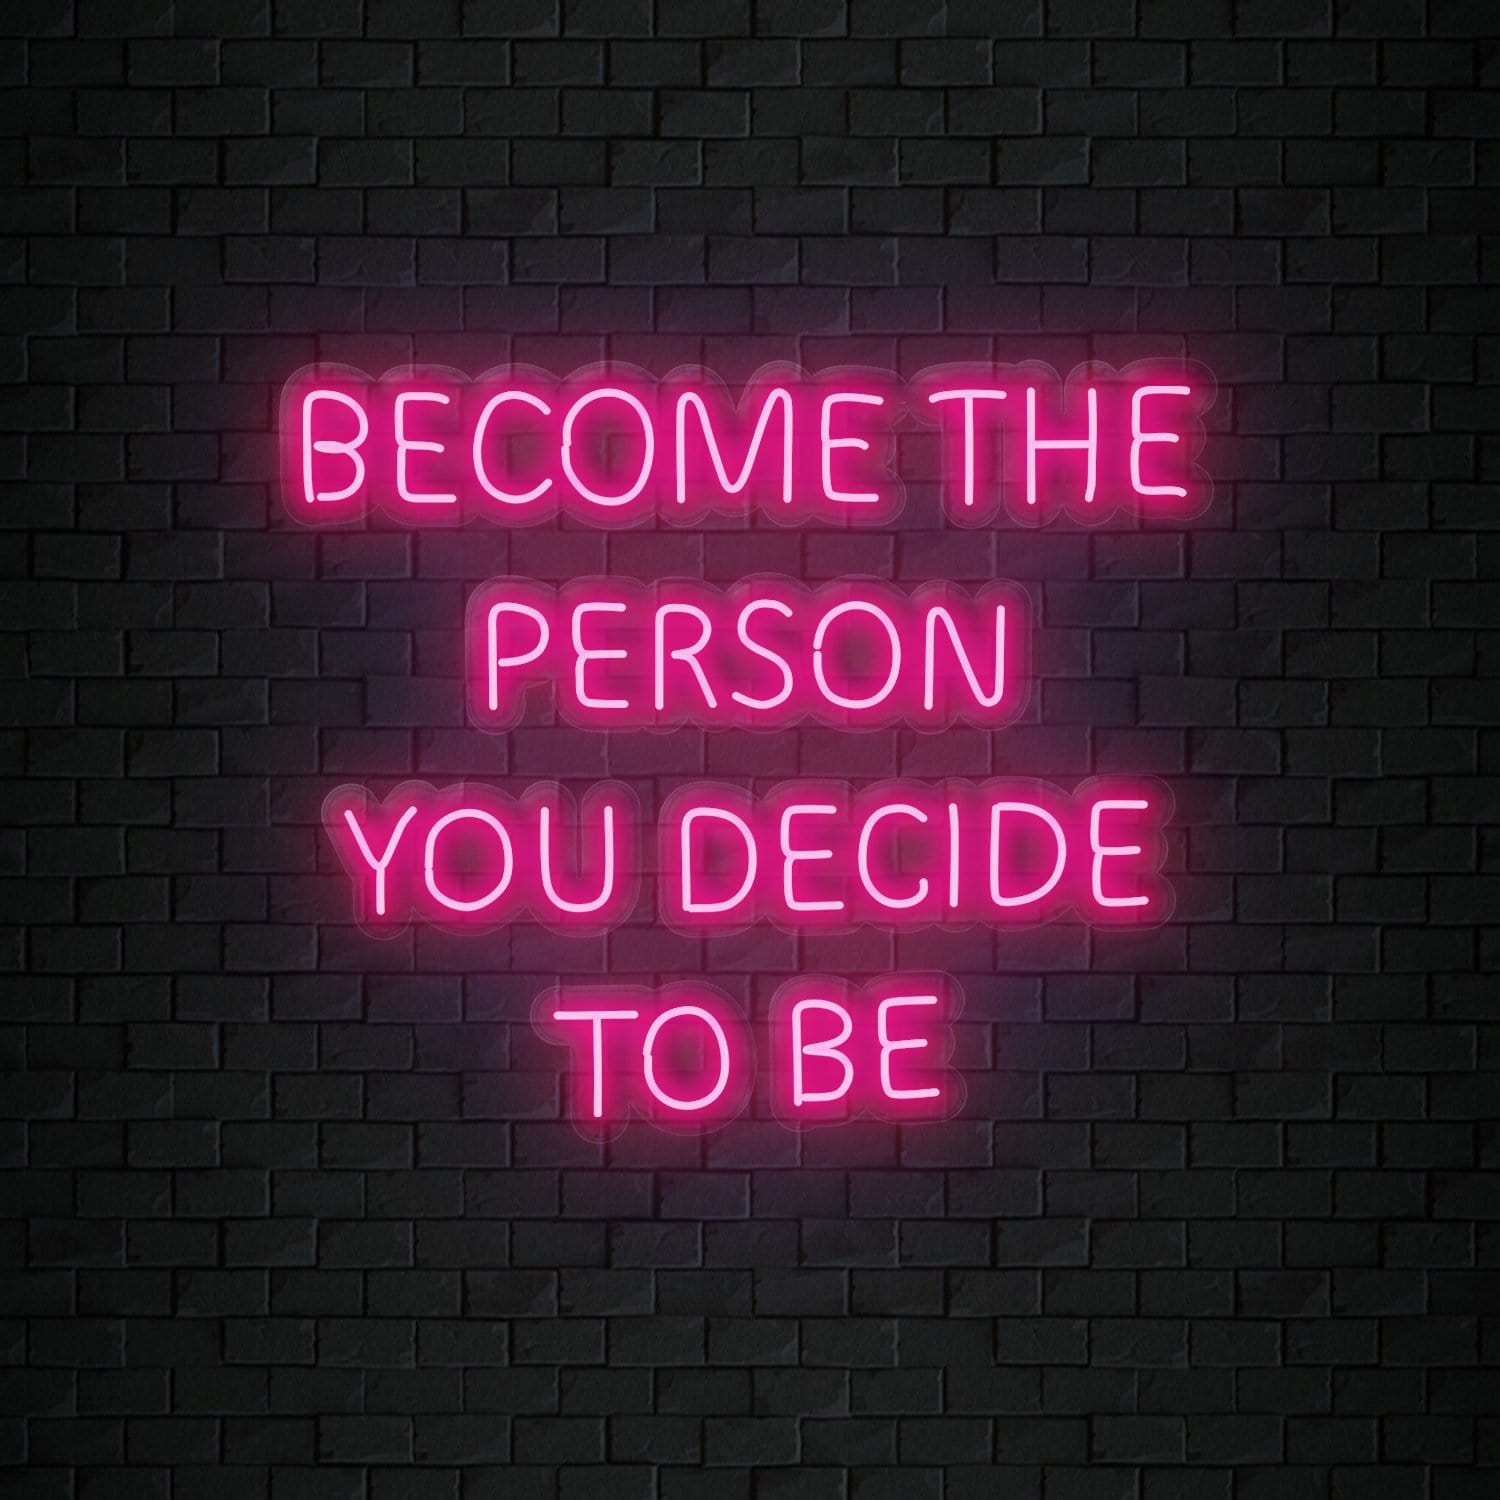 "Become The Person You Decide To Be" LED Neonschild Sign Schriftzug - NEONEVERGLOW